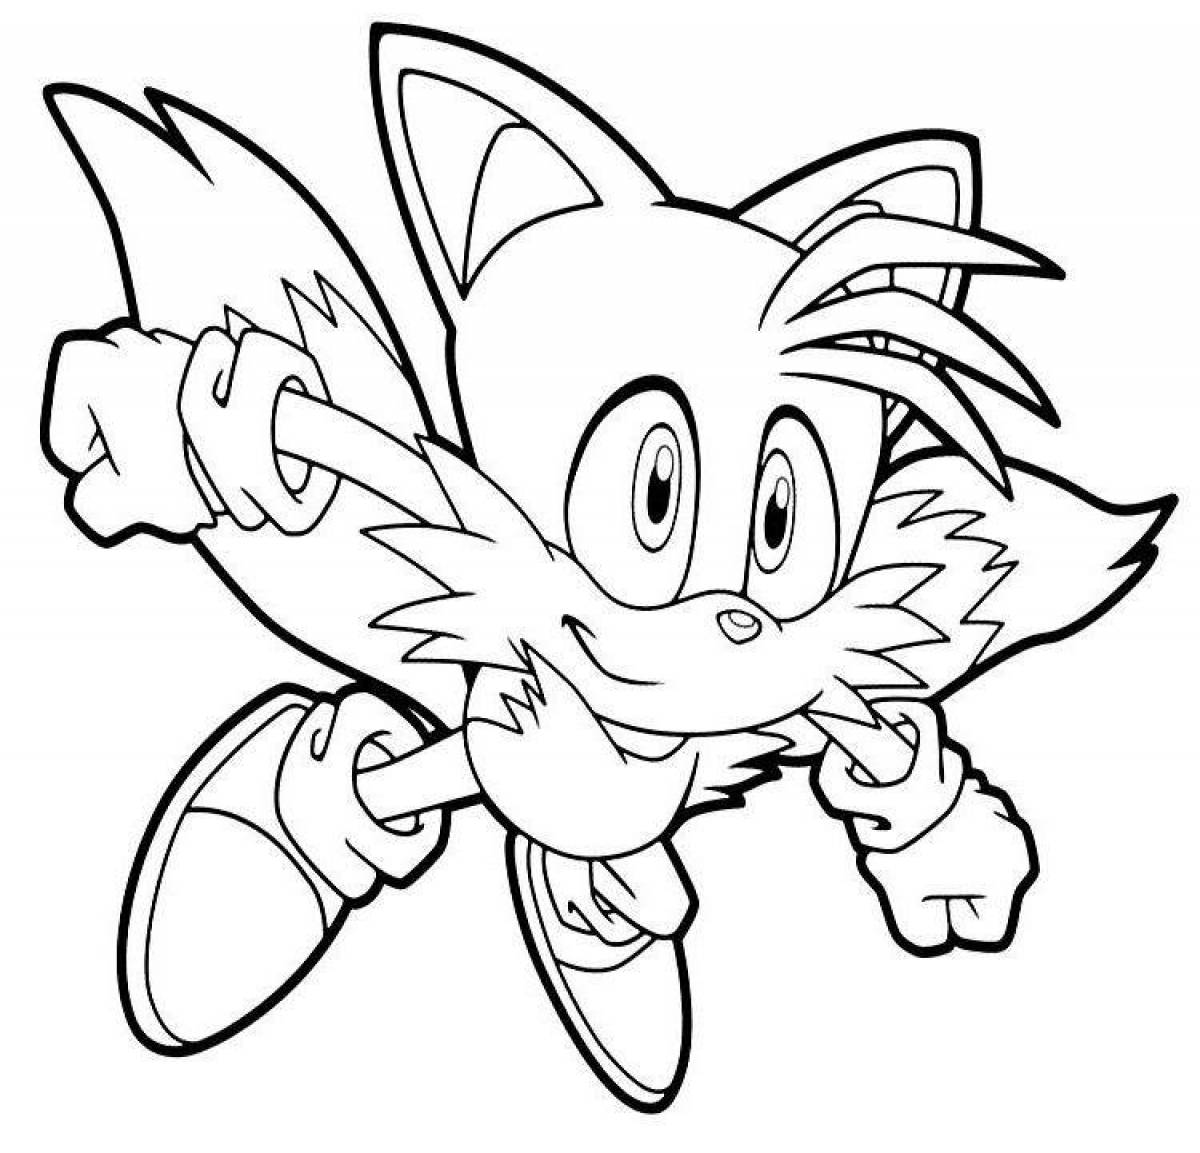 Playful sonic boom coloring book